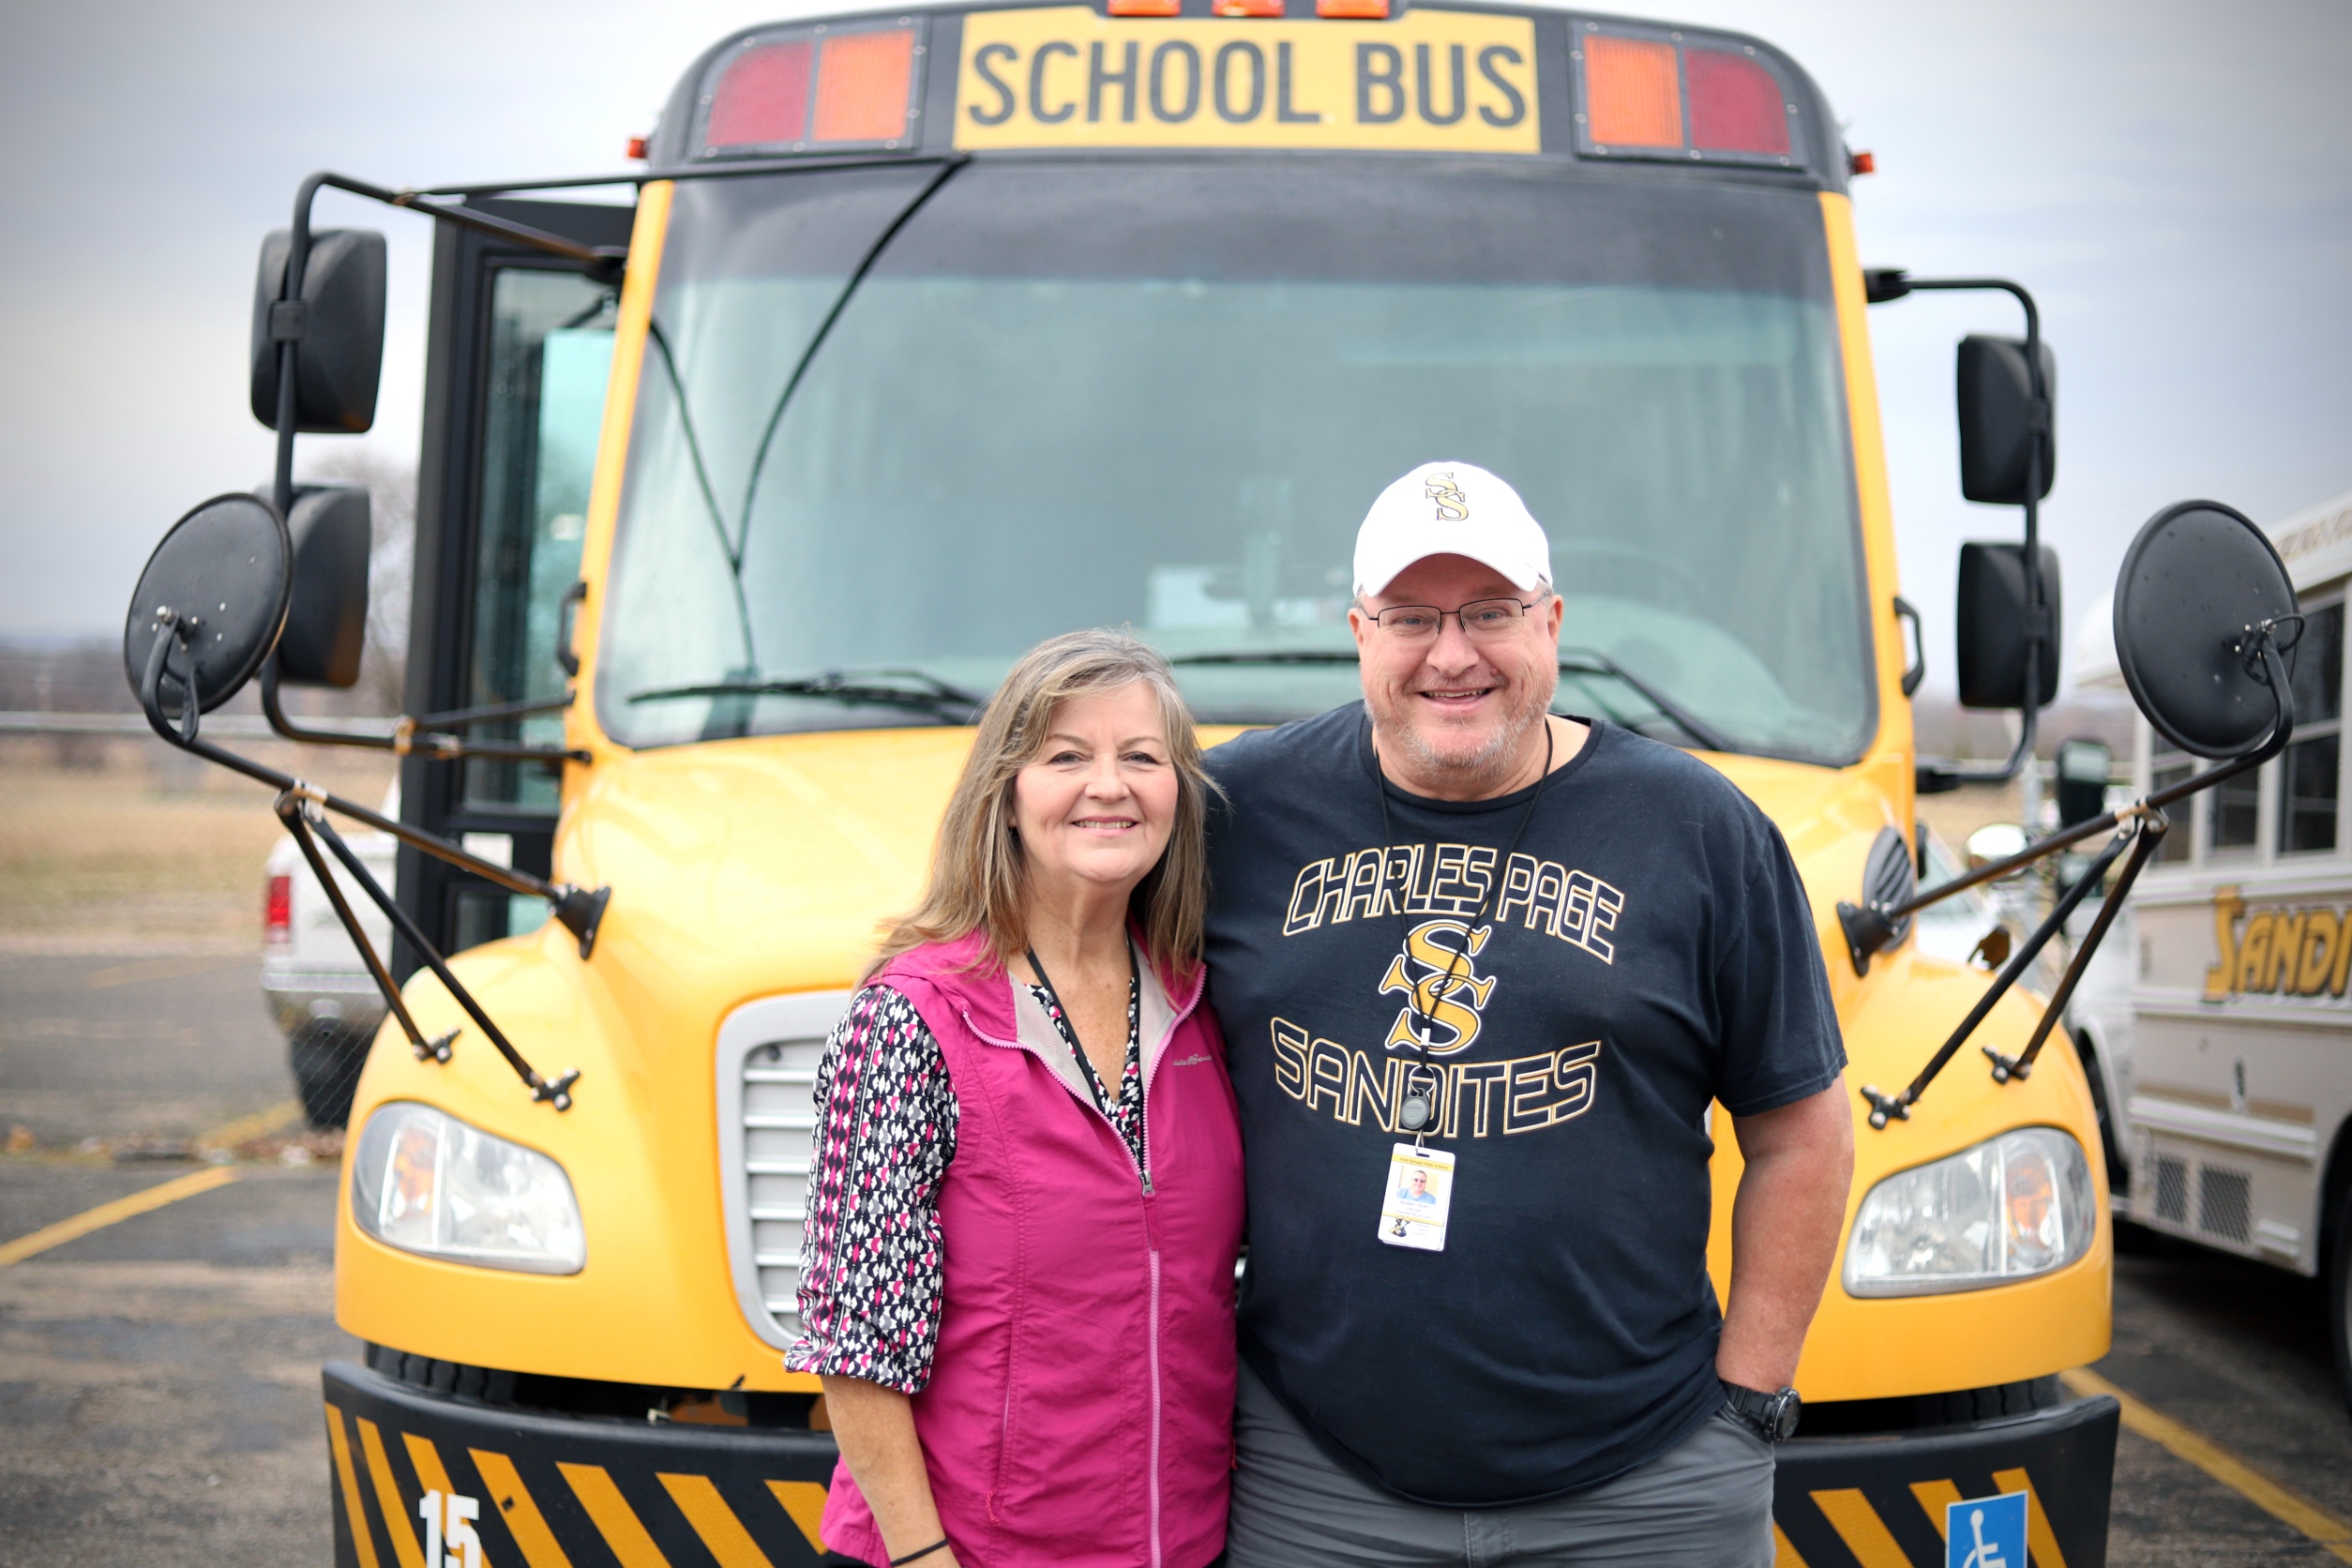 Two Bus Drivers standing and smiling in front of a yellow bus